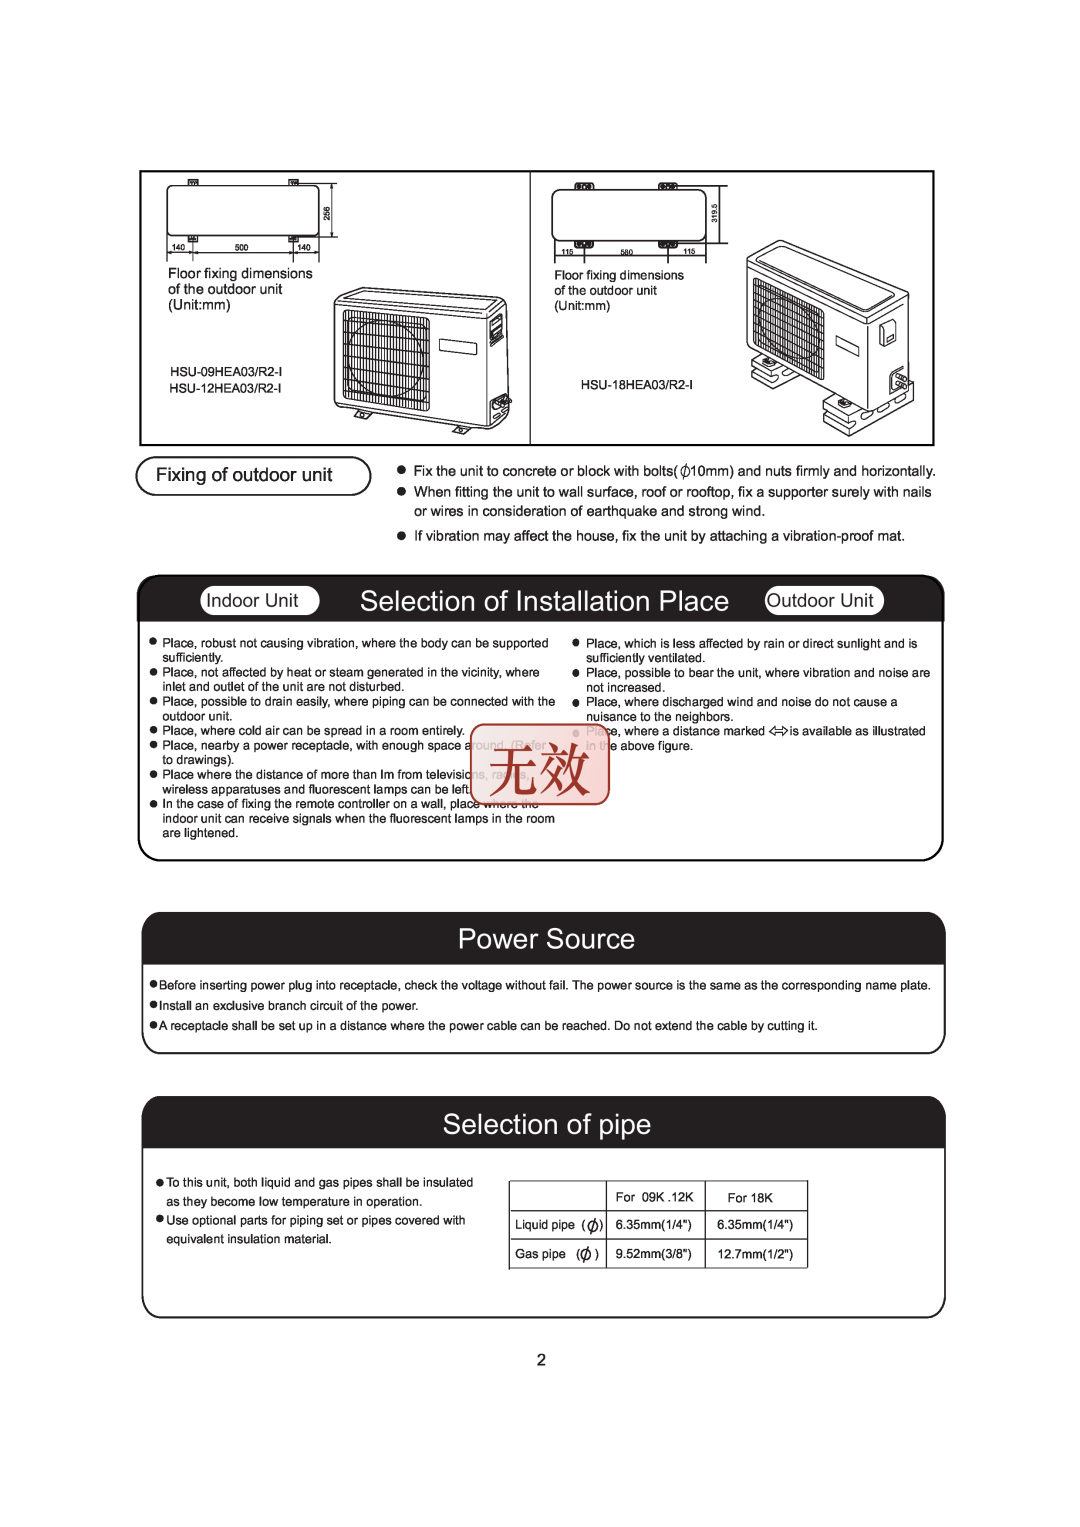 Haier HSU-09HEA03/R2-I Selection of Installation Place Outdoor Unit, Power Source, Selection of pipe, Indoor Unit 